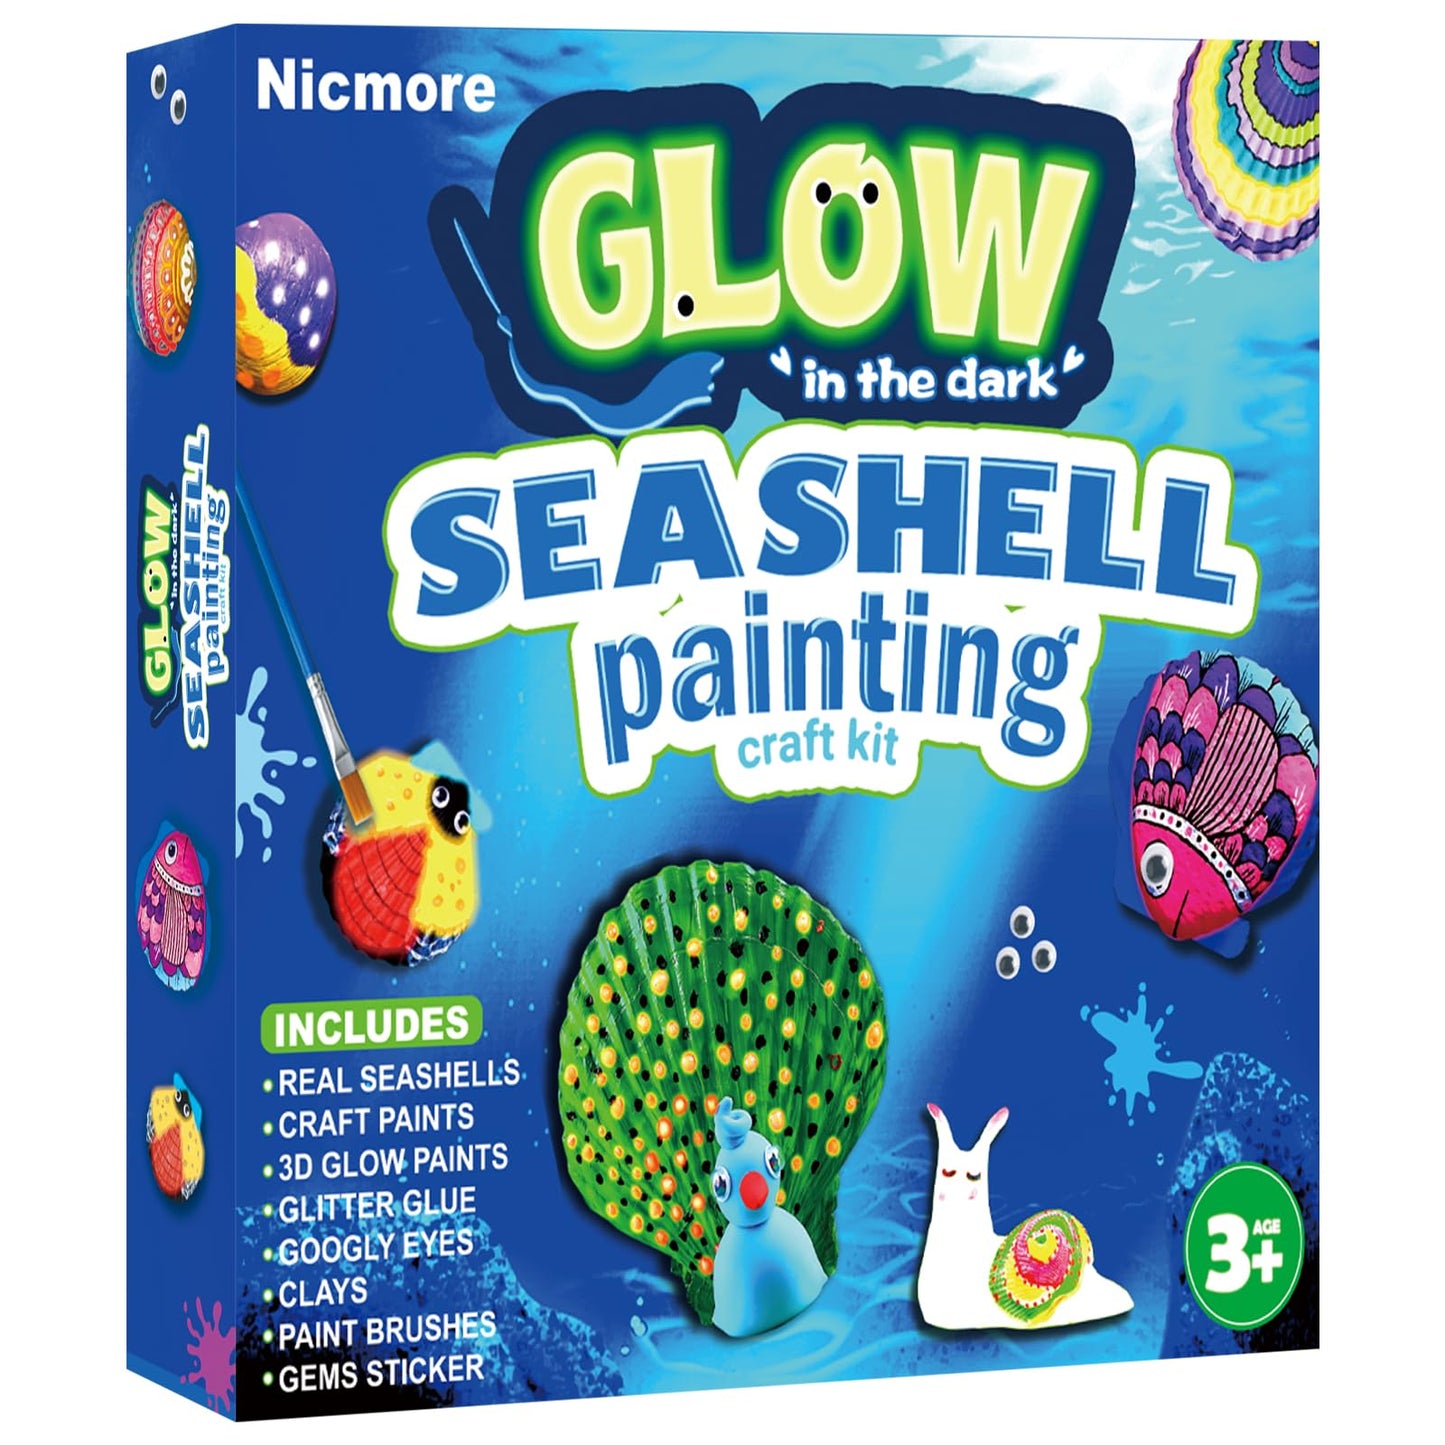  Kids Rock Painting Kit Christmas Gift - 20 Rocks Glow in The  Dark - Arts and Crafts for Kids 4-6, Toys for Ages 4-12 Boys and Girls,  Creative Gift for Kids